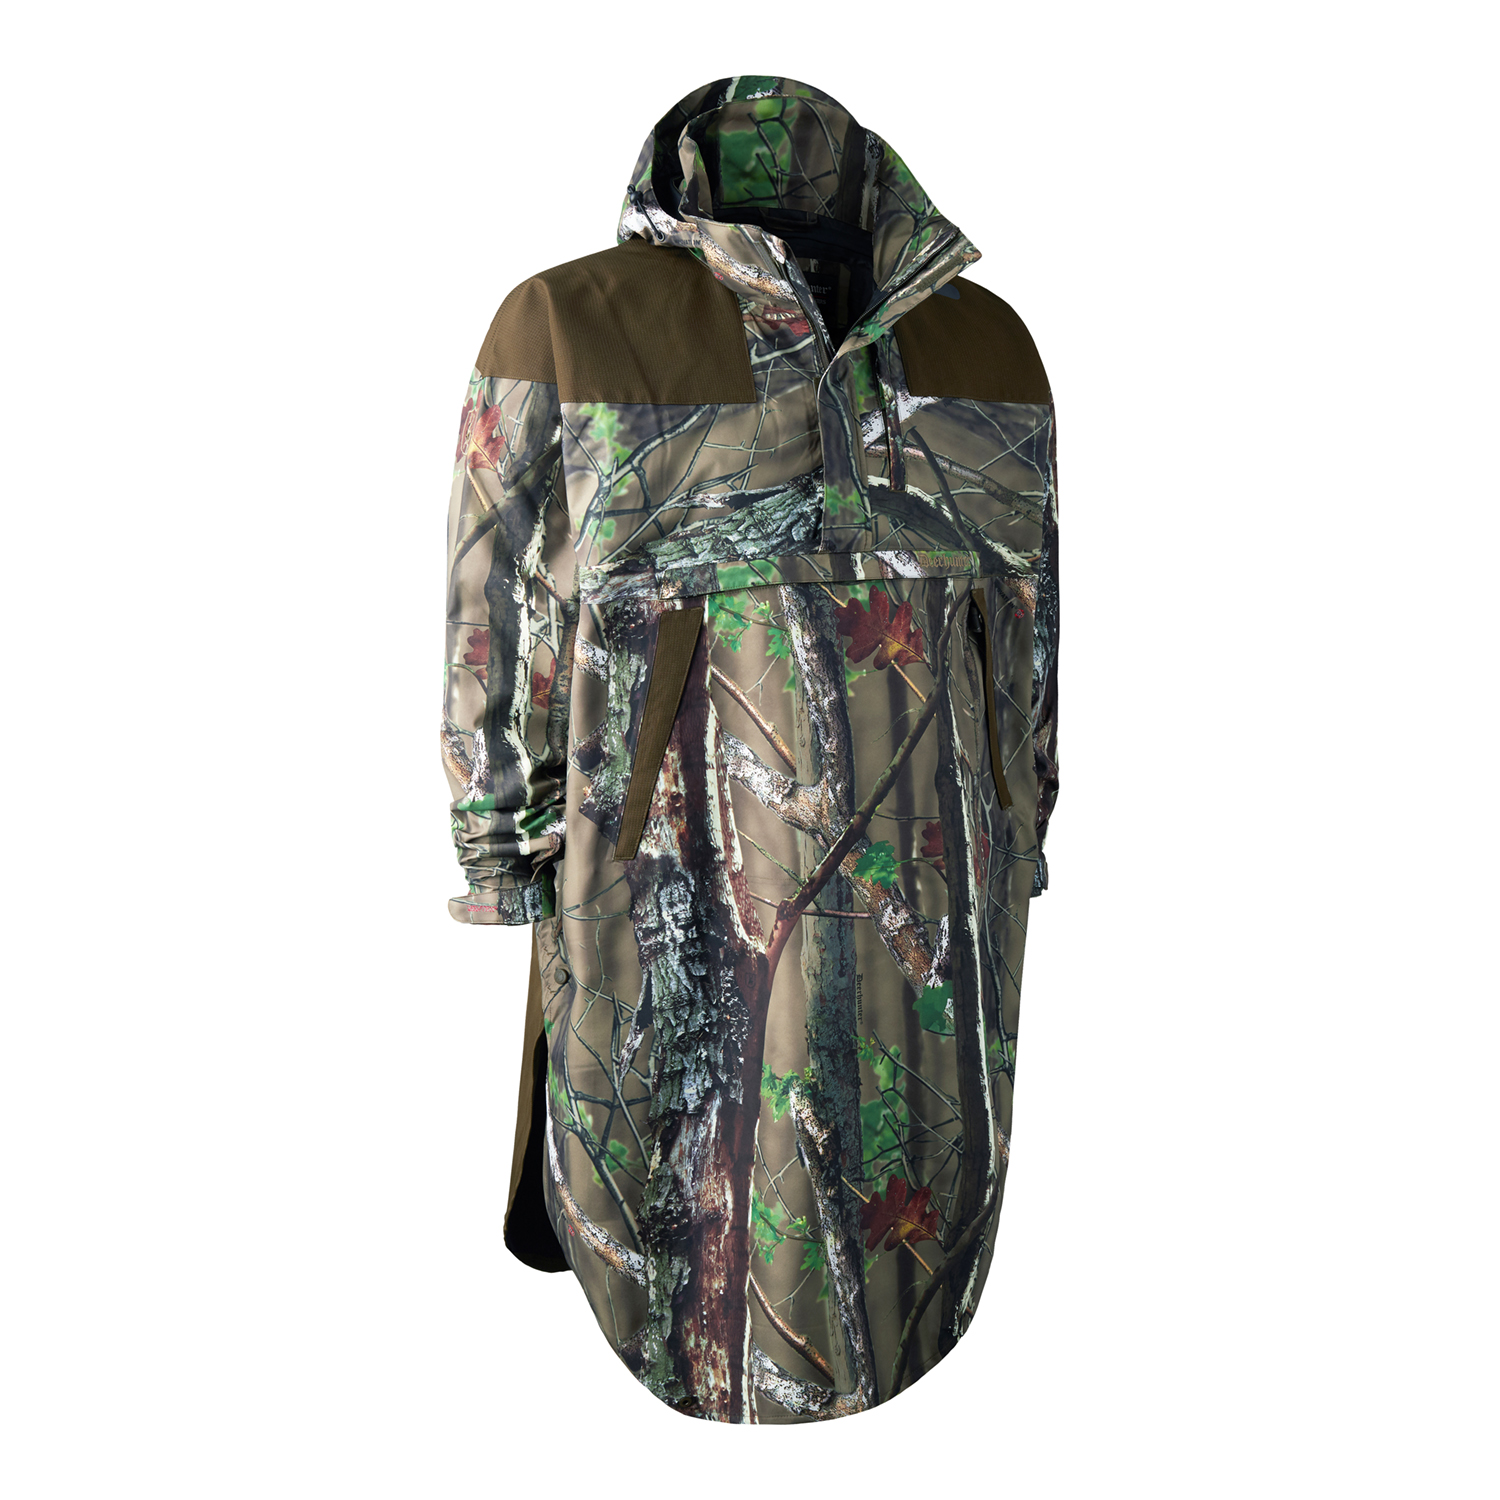 Track regn anorak - Innovation GH Camouflage - 2XL thumbnail